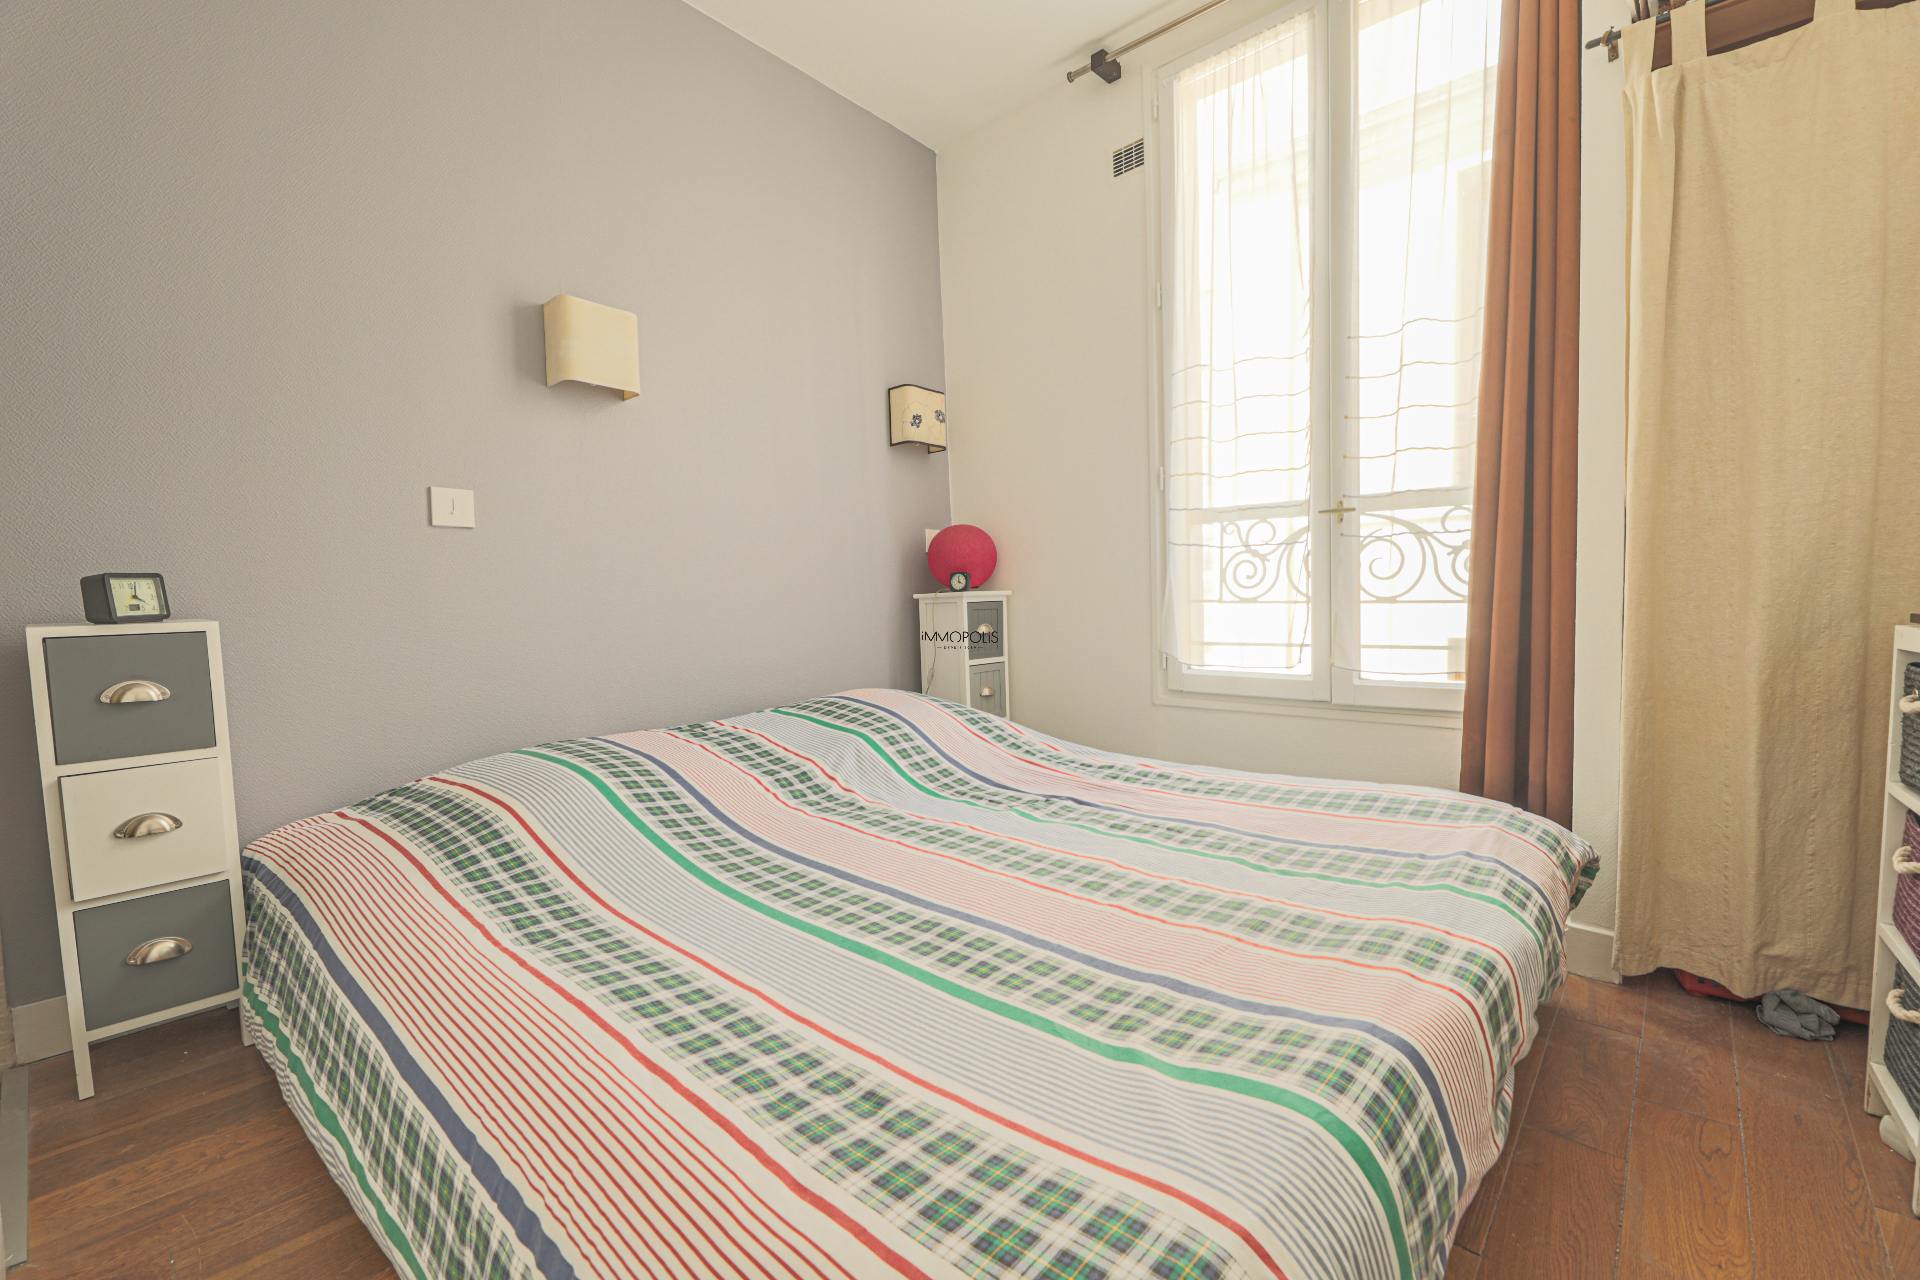 Beau 2 rooms rue Berthe of 30 m2 in good condition with very compact elevator and plan 6